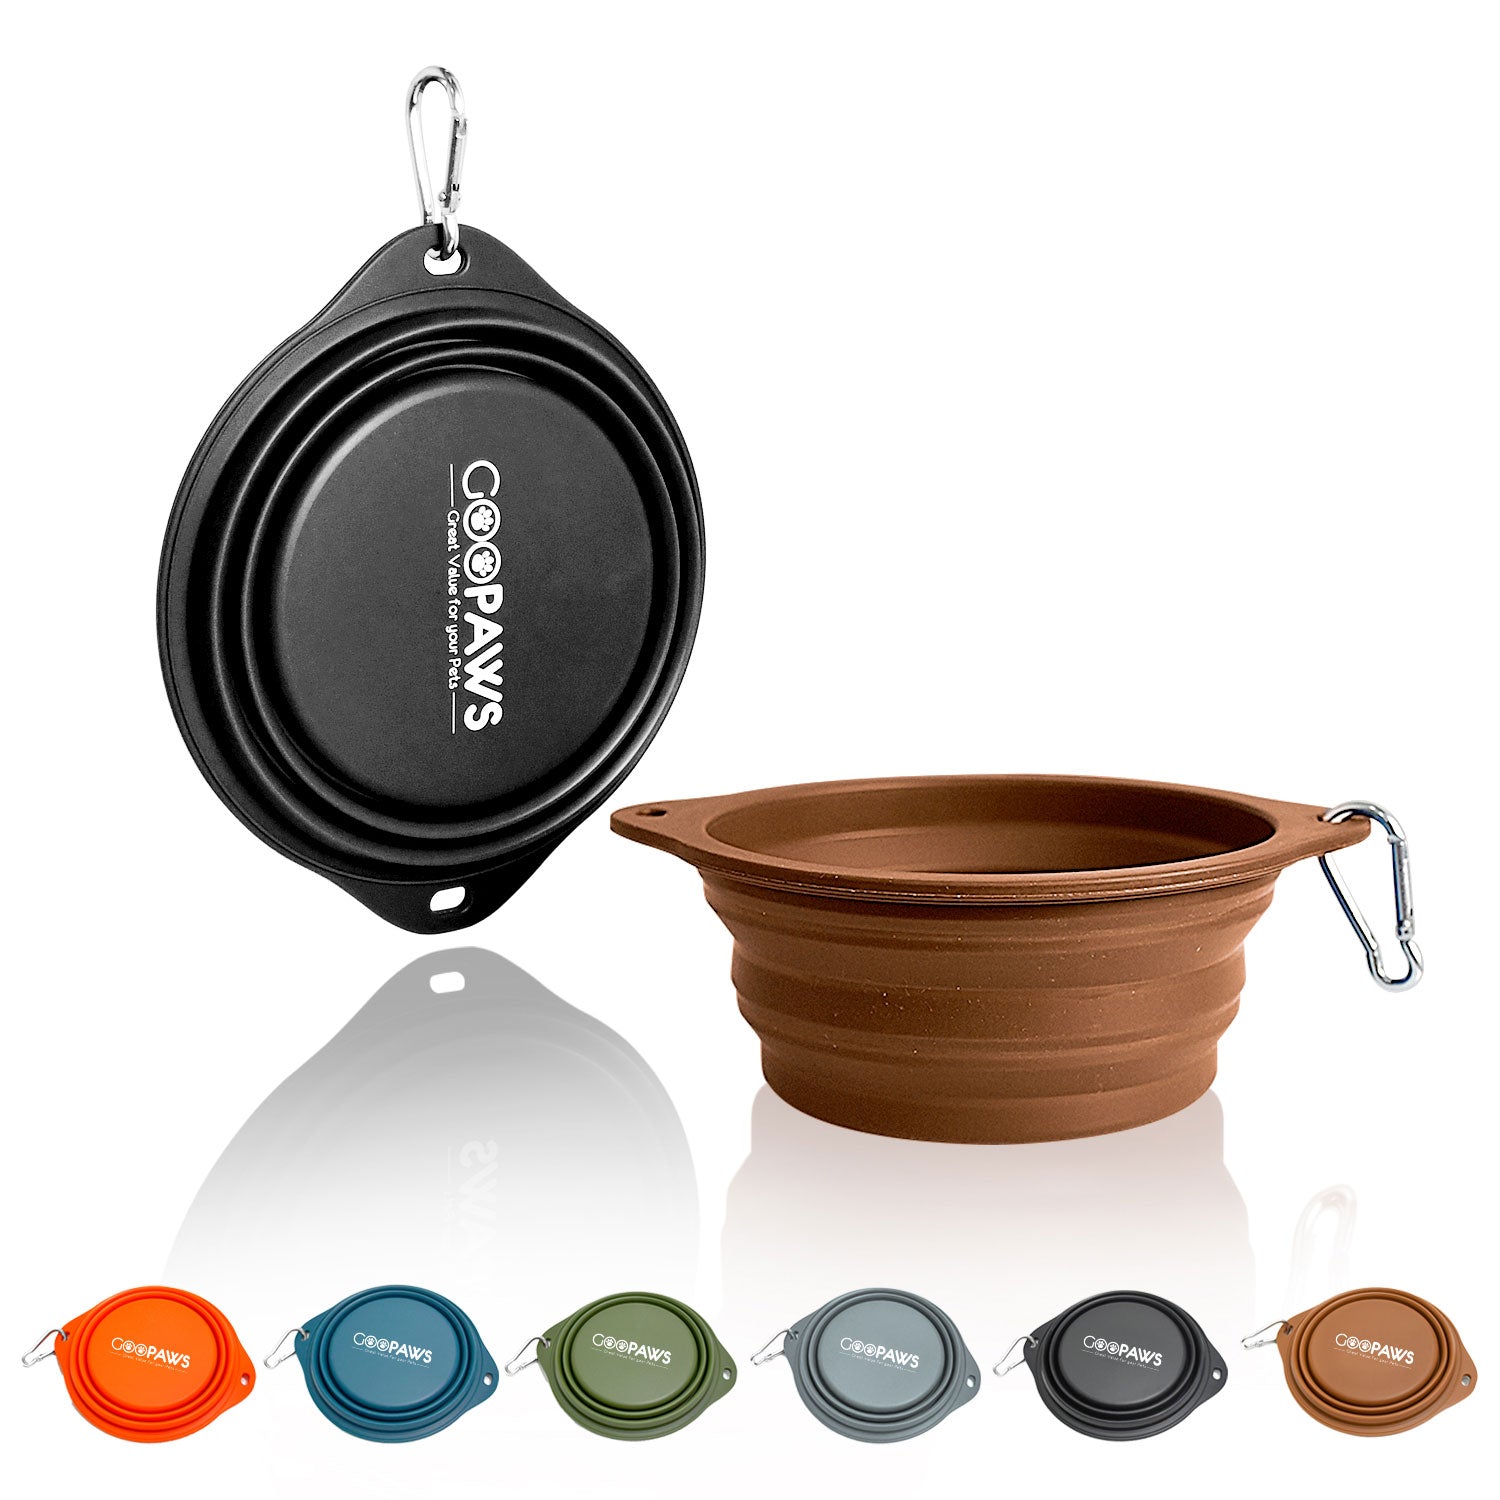 GOOPAWS 2 Pack Silicone Non-Skid Travel Dog and Cat Bowl, Black&Brown